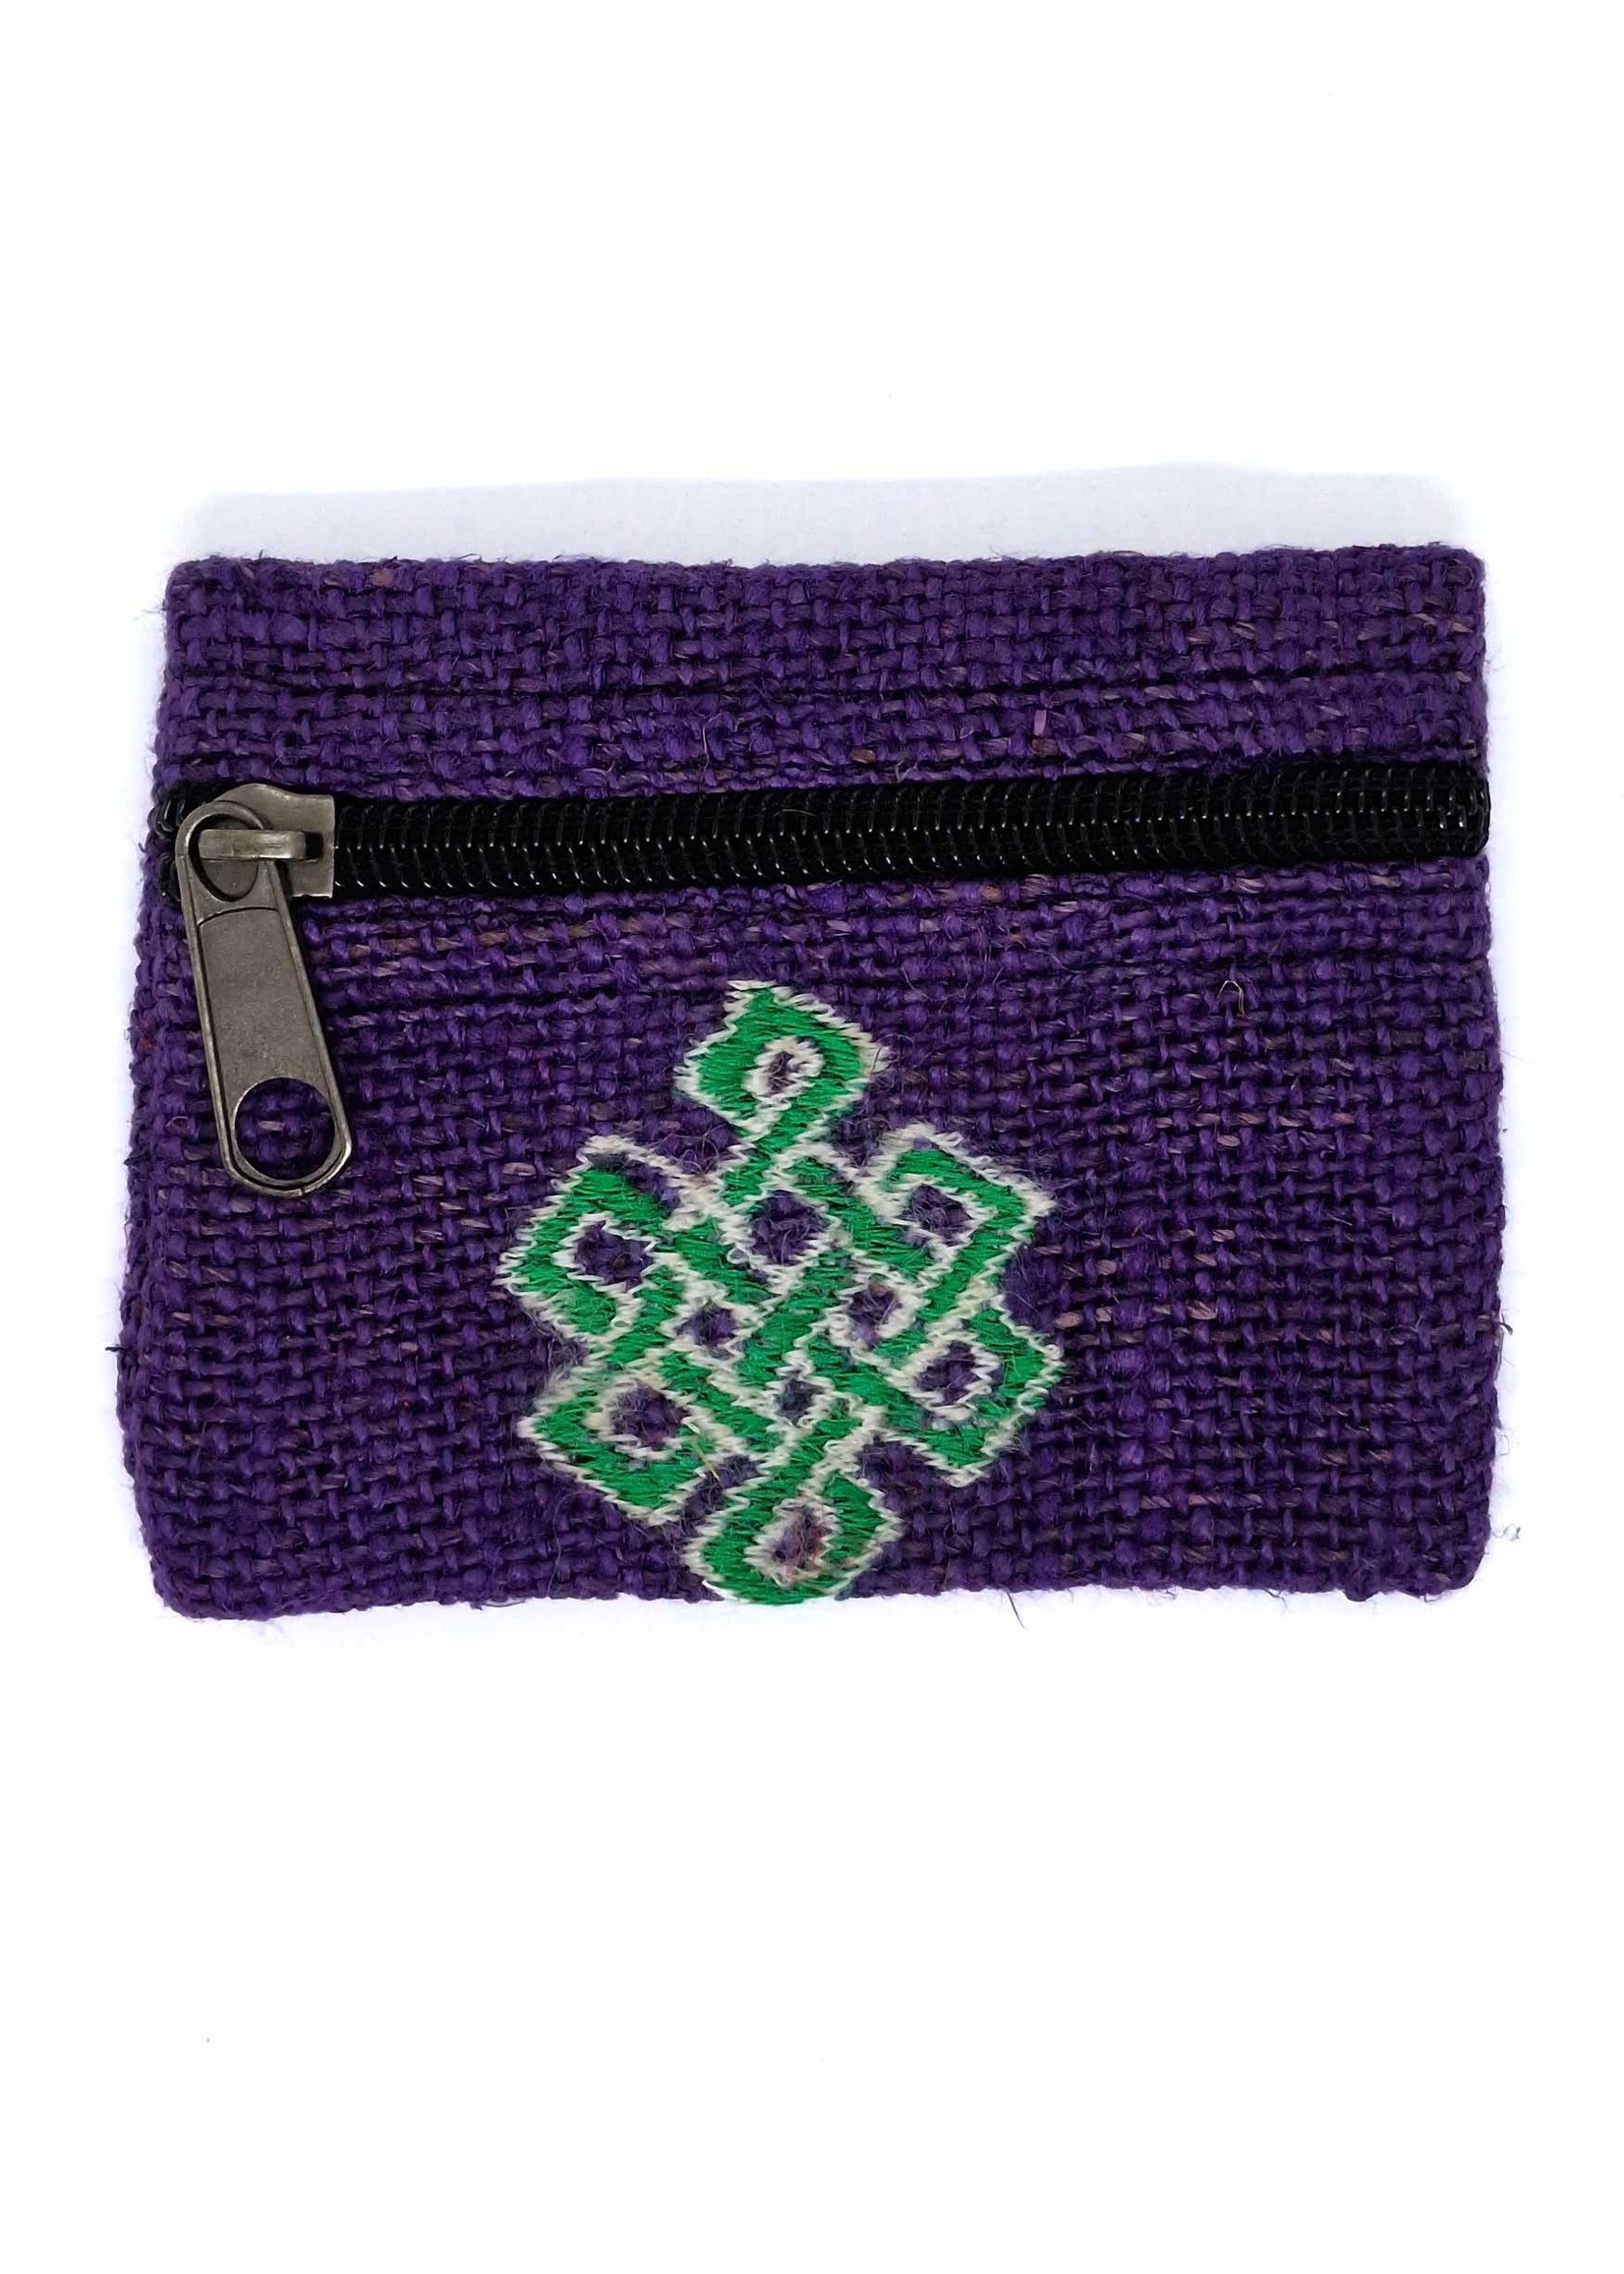 Hemp Coin Purse With Embroidery Endless Knot